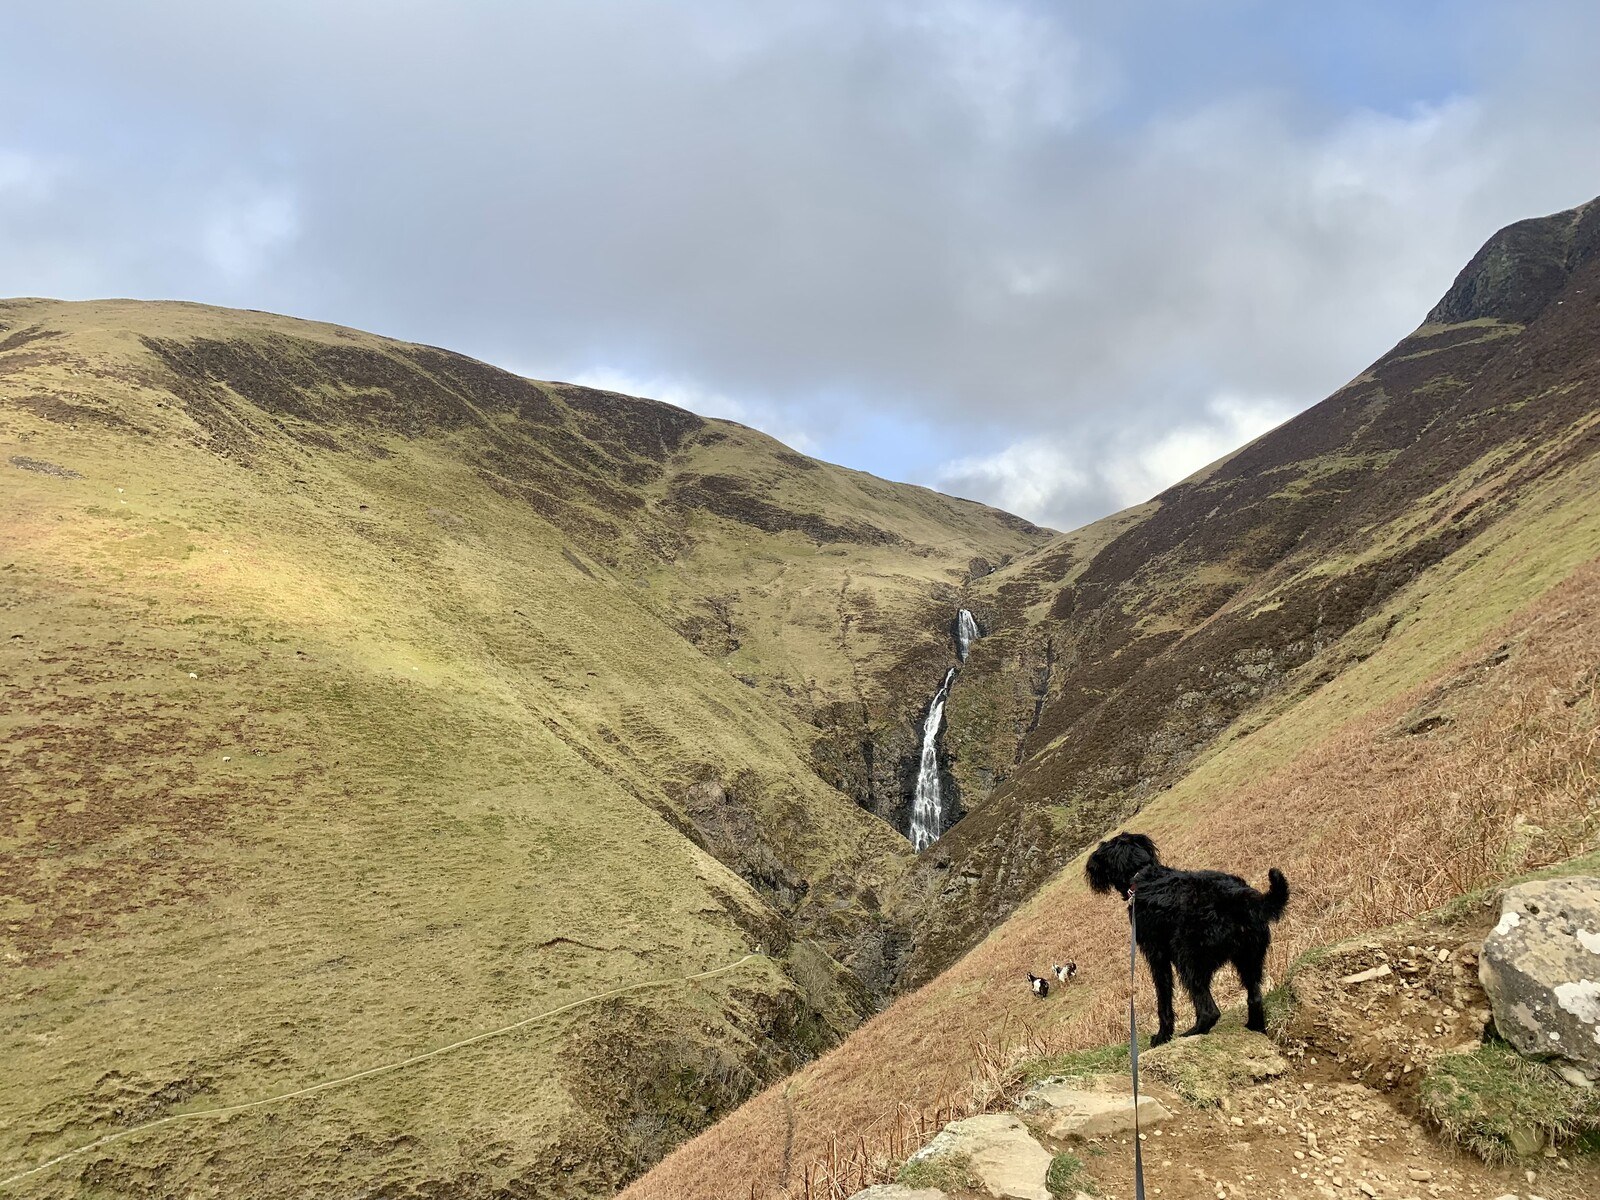 Ghyll overlooking a deep cleft between steep grassy hills with a waterfall at the top of the cleft